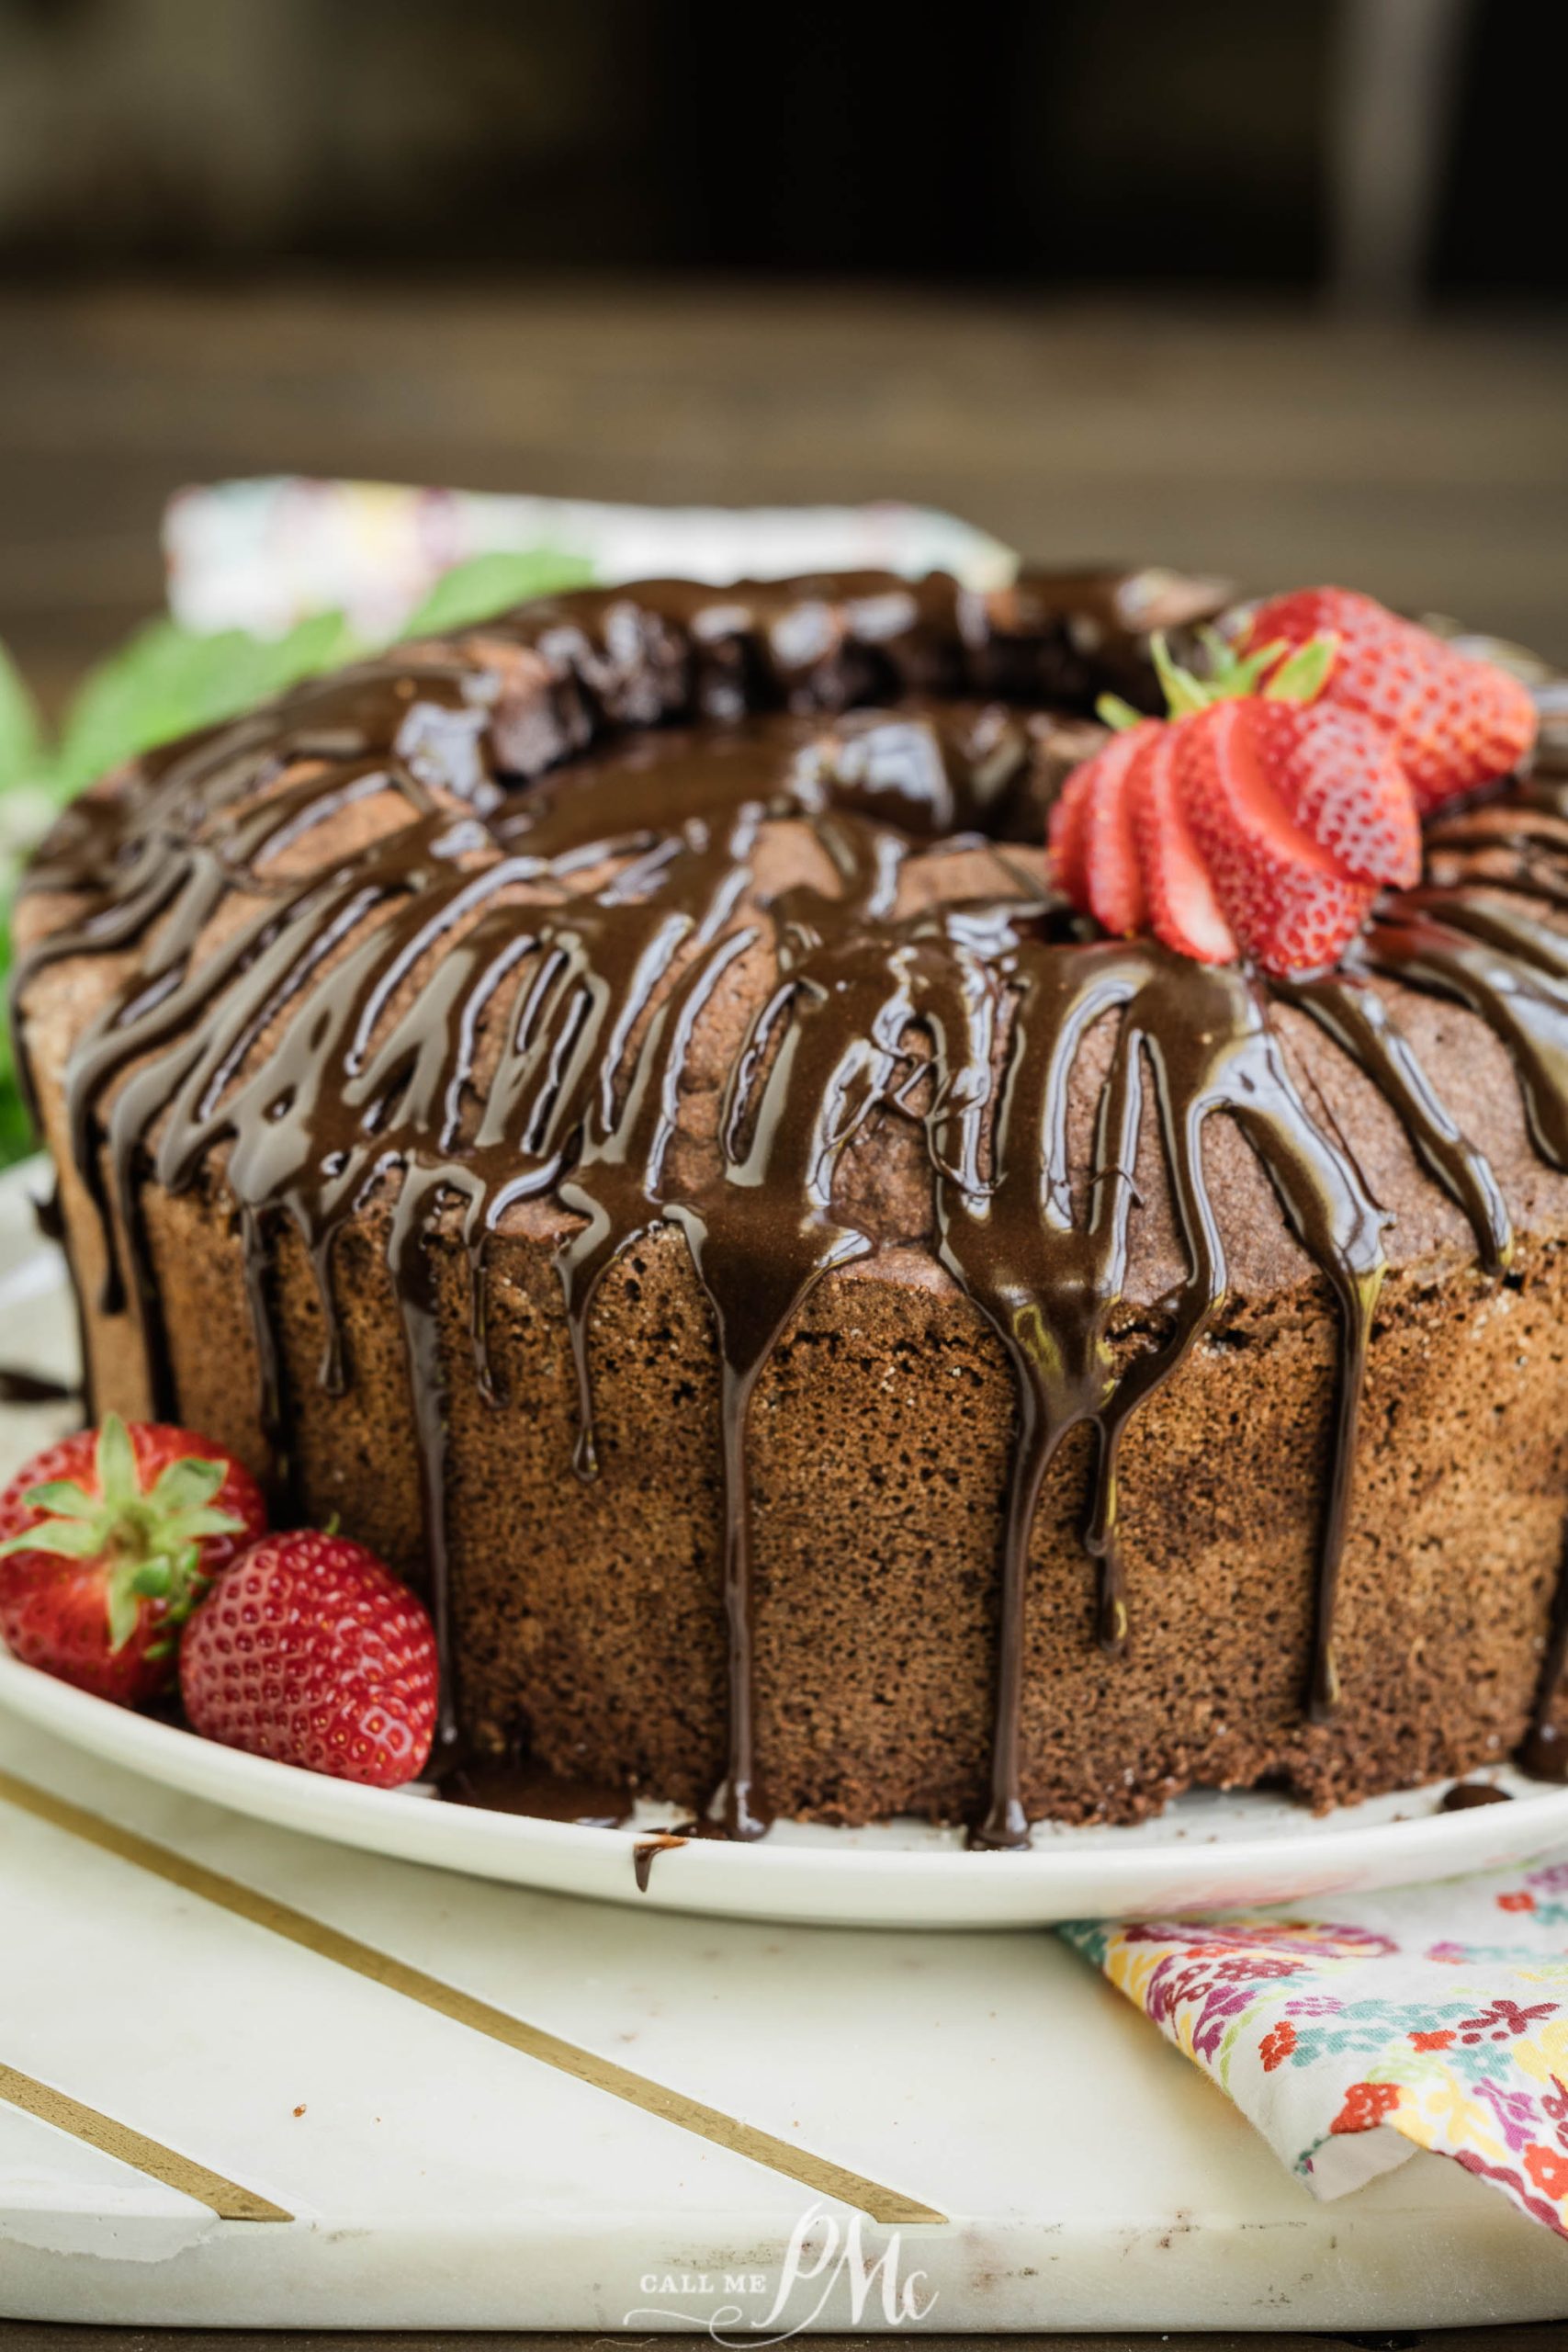 A chocolate cake on a white plate, drizzled with chocolate sauce and garnished with fresh strawberries.